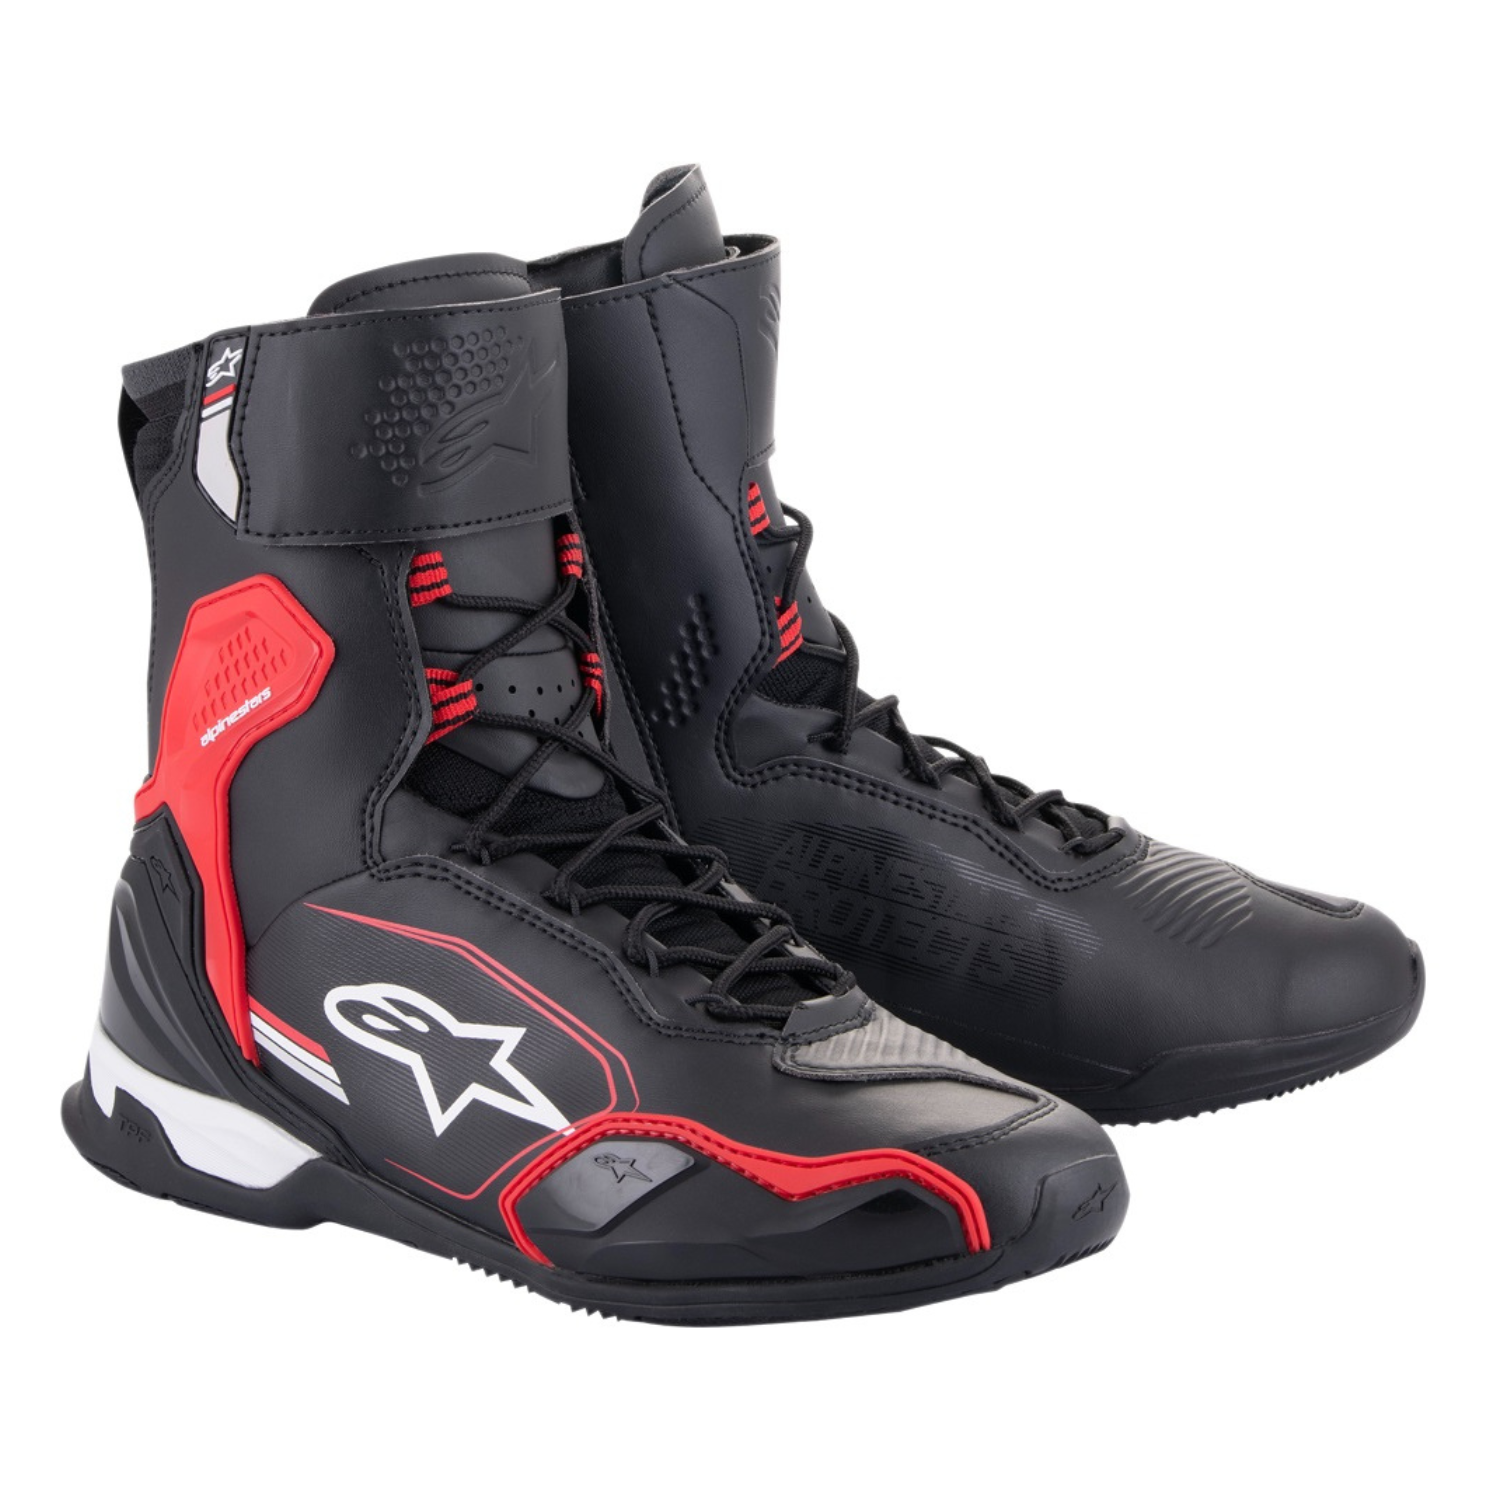 Image of EU Alpinestars Superfaster Shoes Black Bright Red White Taille US 9